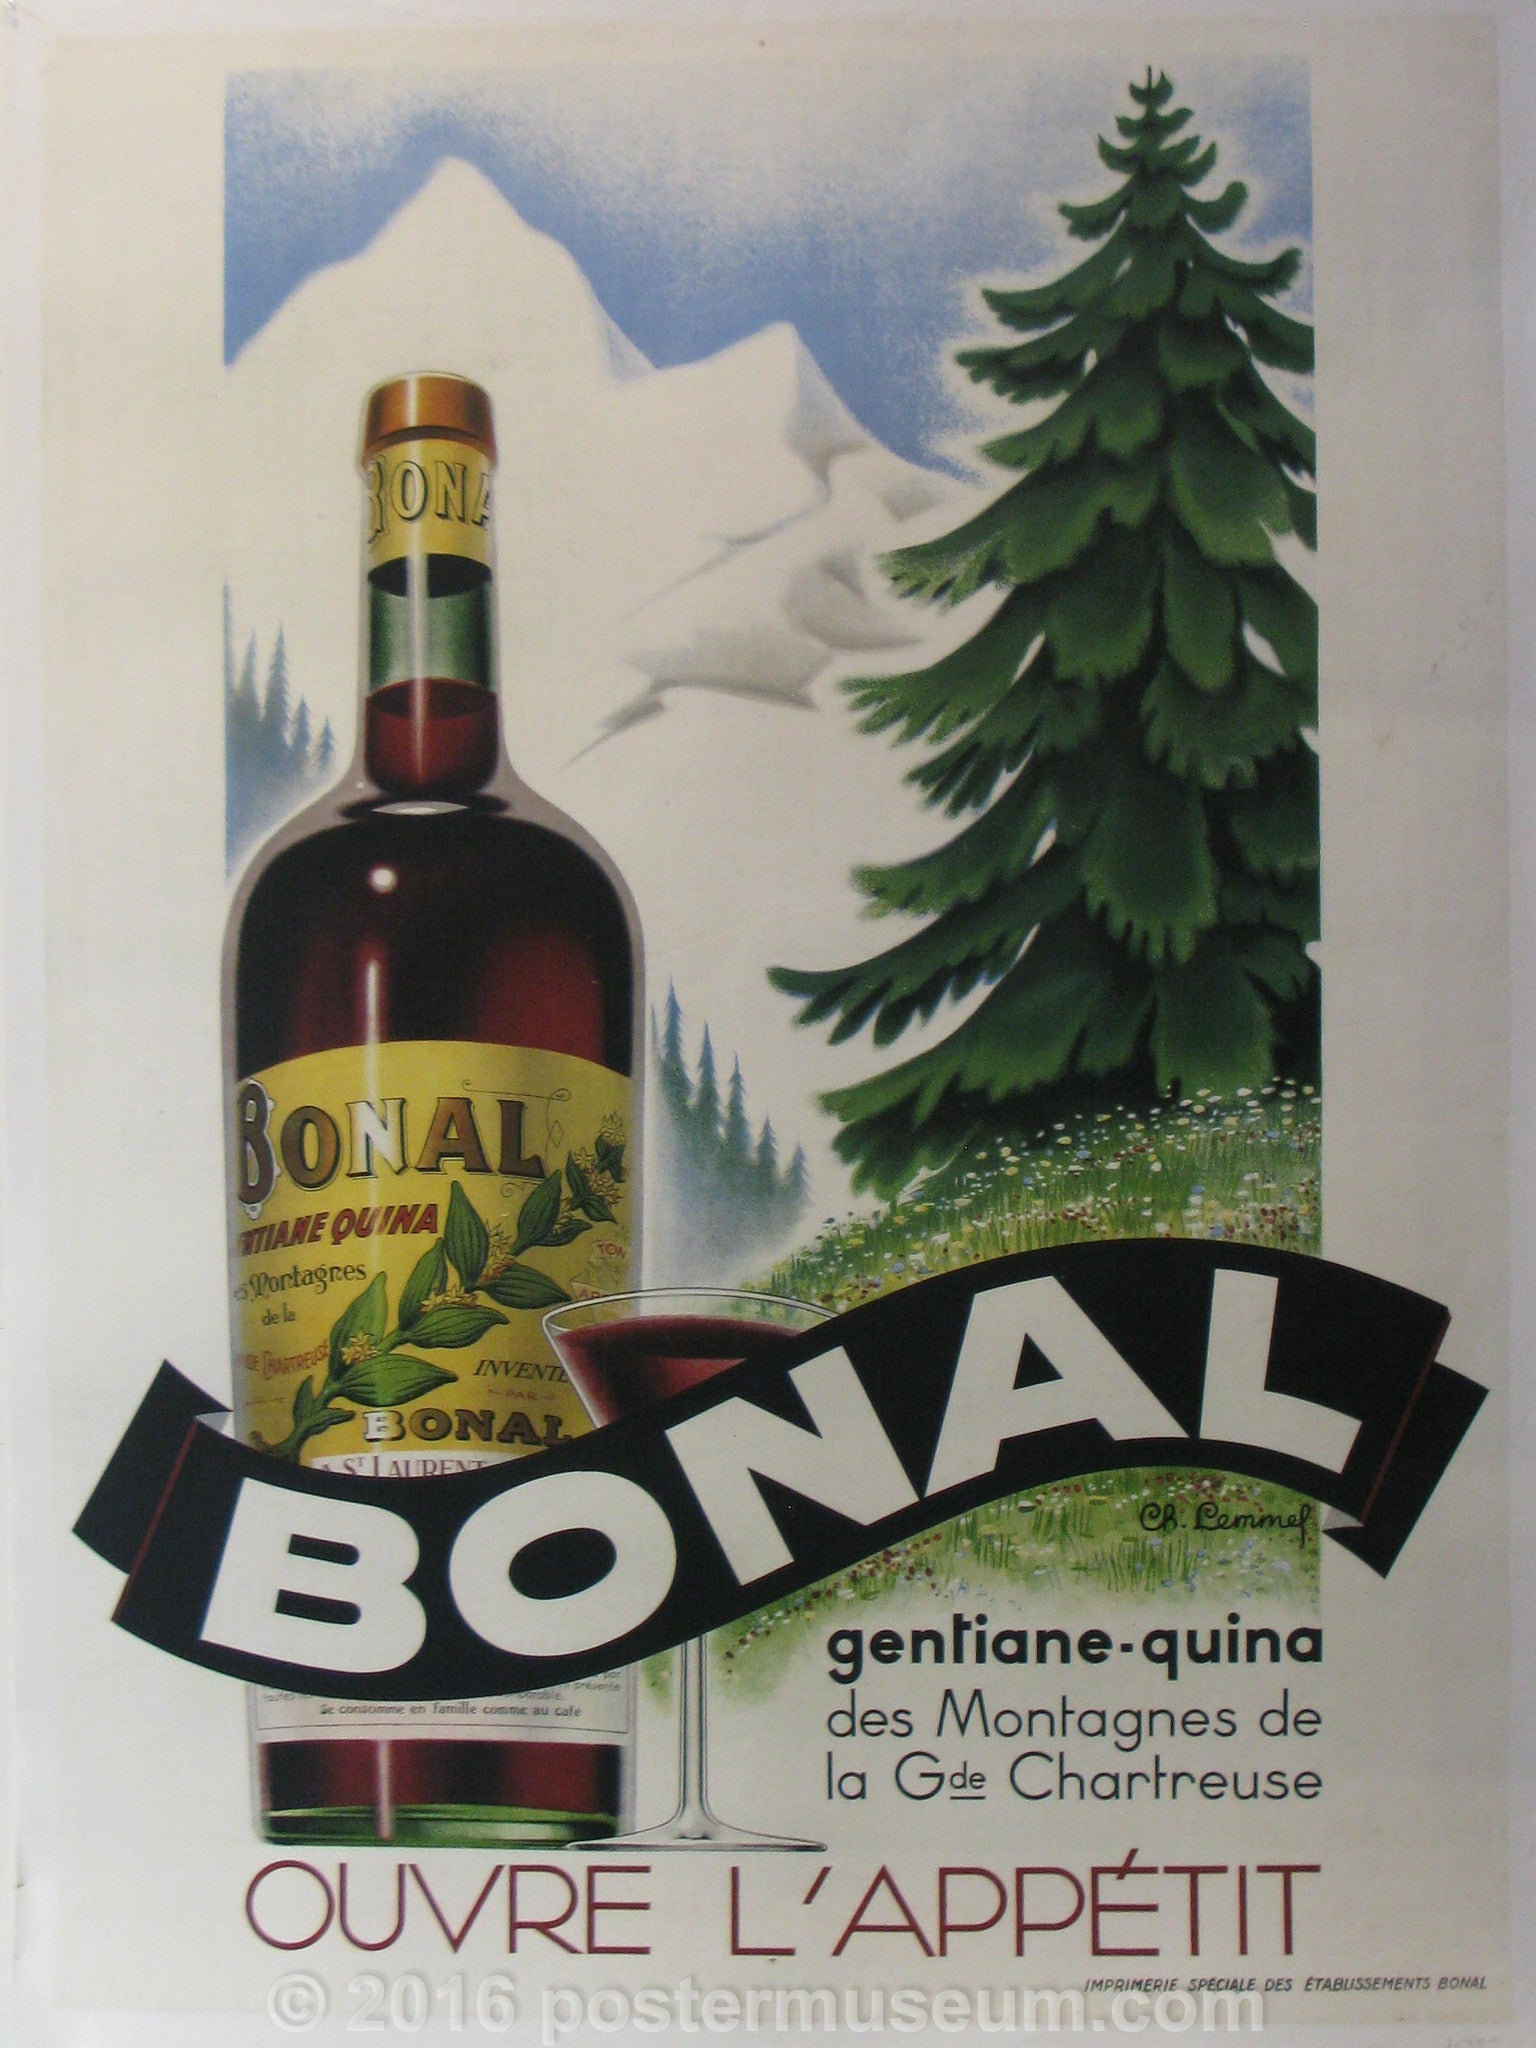 A large bottle sits with a large evergreen tree, Bonal the key to you appetite 